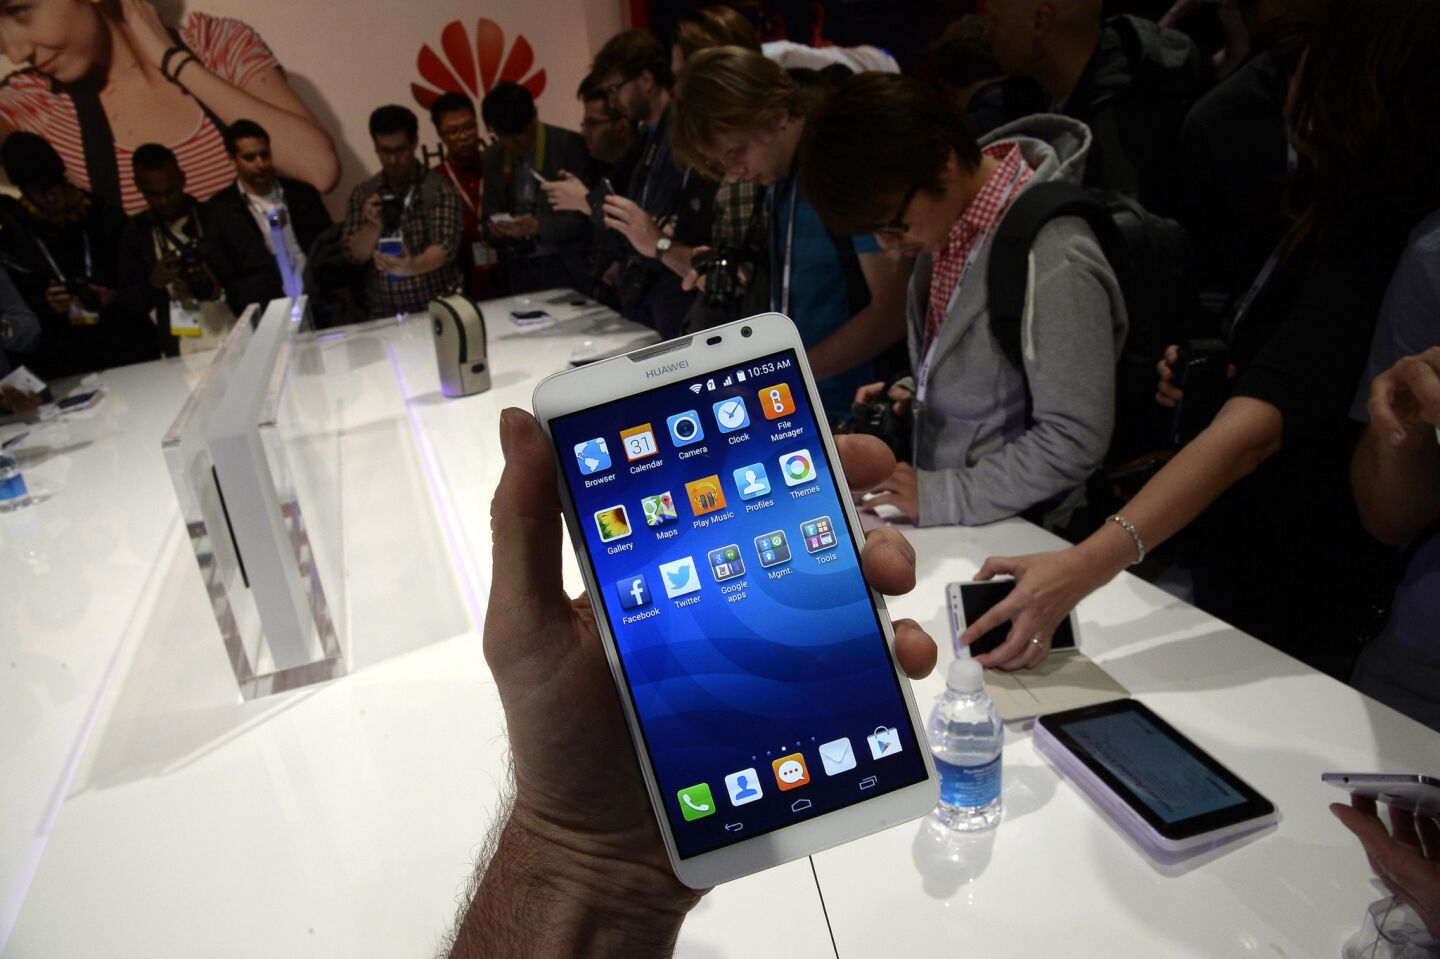 The Huawei Ascend Mate2 4G is shown during the press day at International CES in Las Vegas.